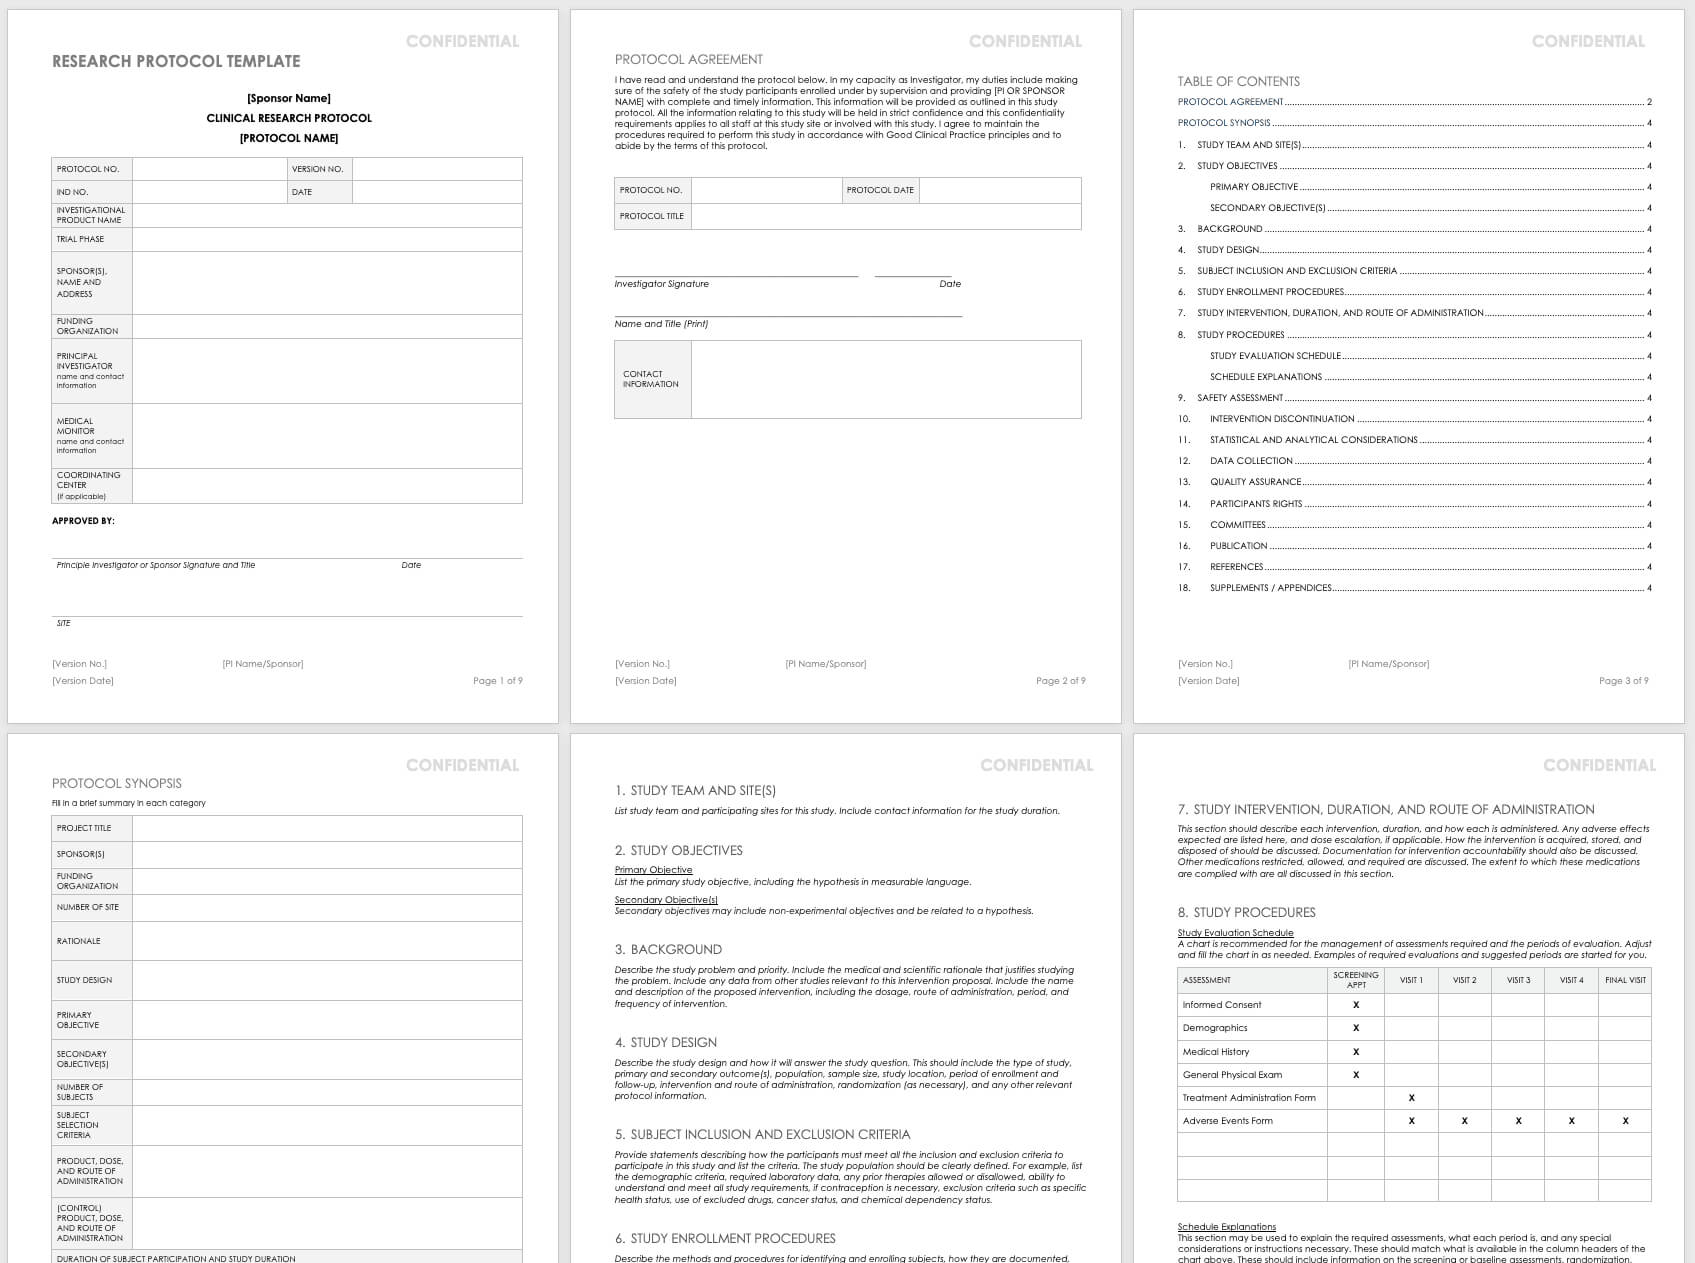 Free Clinical Trial Templates | Smartsheet Intended For Case Report Form Template Clinical Trials